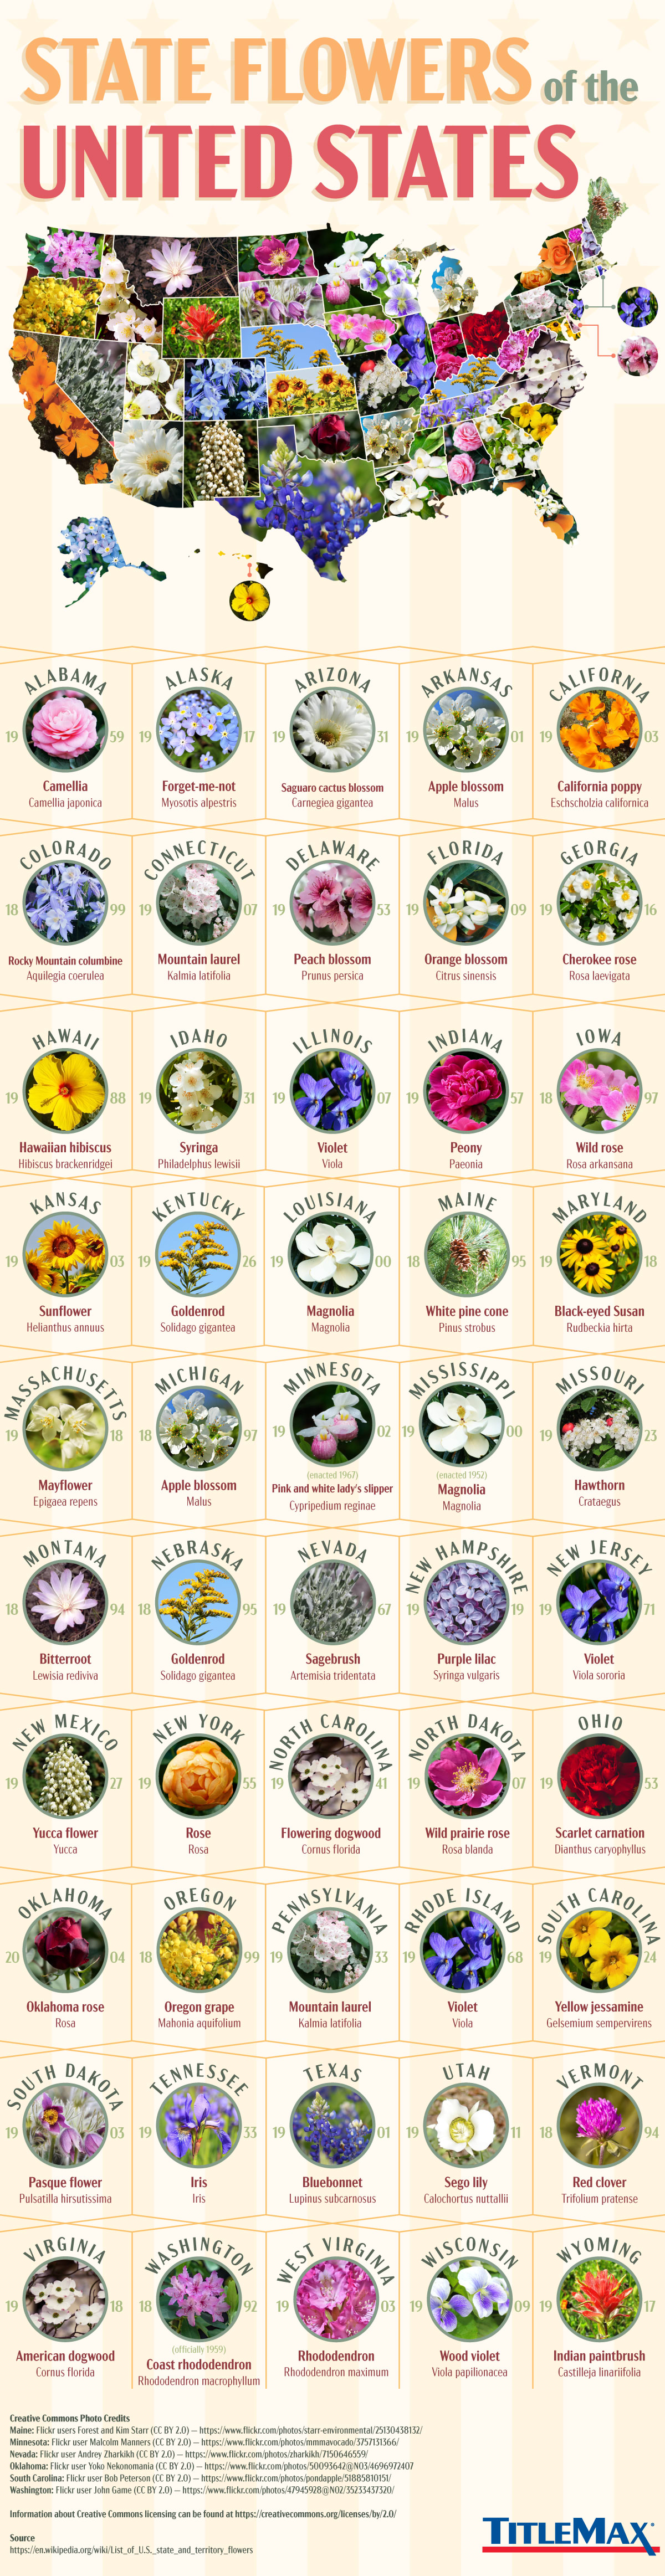 List of U.S. state and territory flowers - Wikipedia